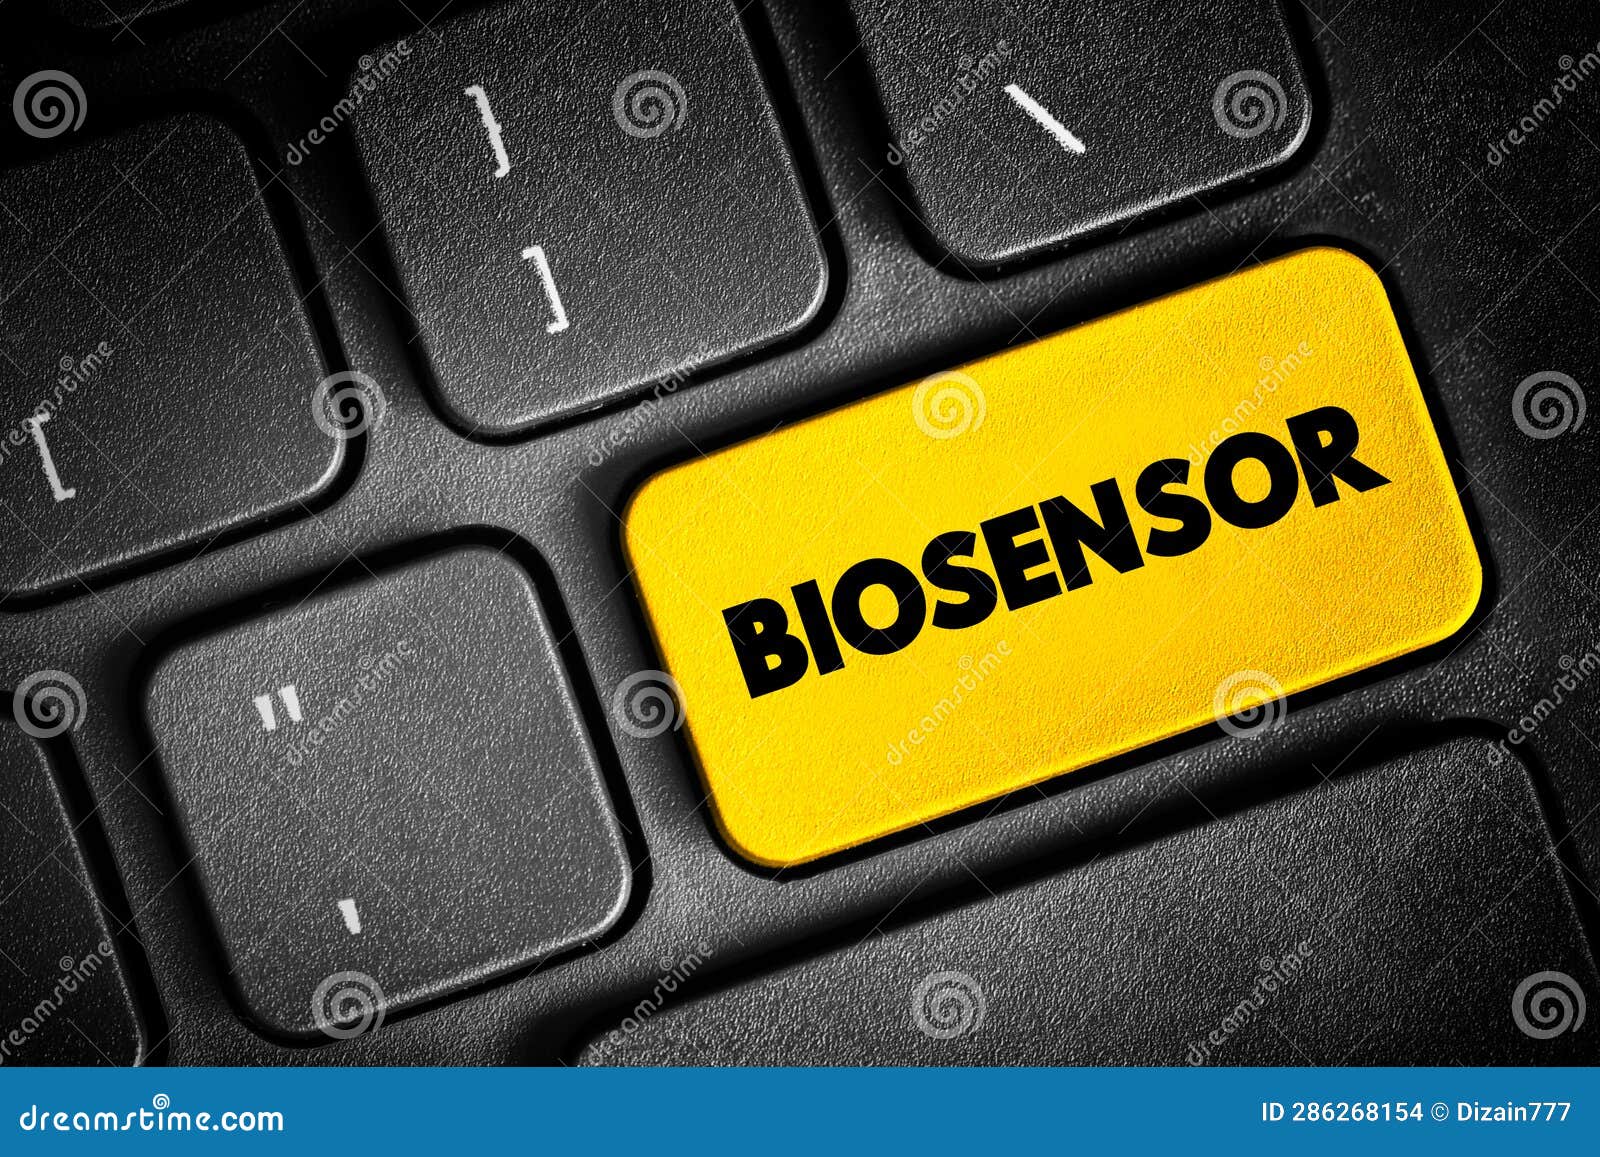 biosensor is an analytical device, used for the detection of a chemical substance, text button on keyboard, concept background